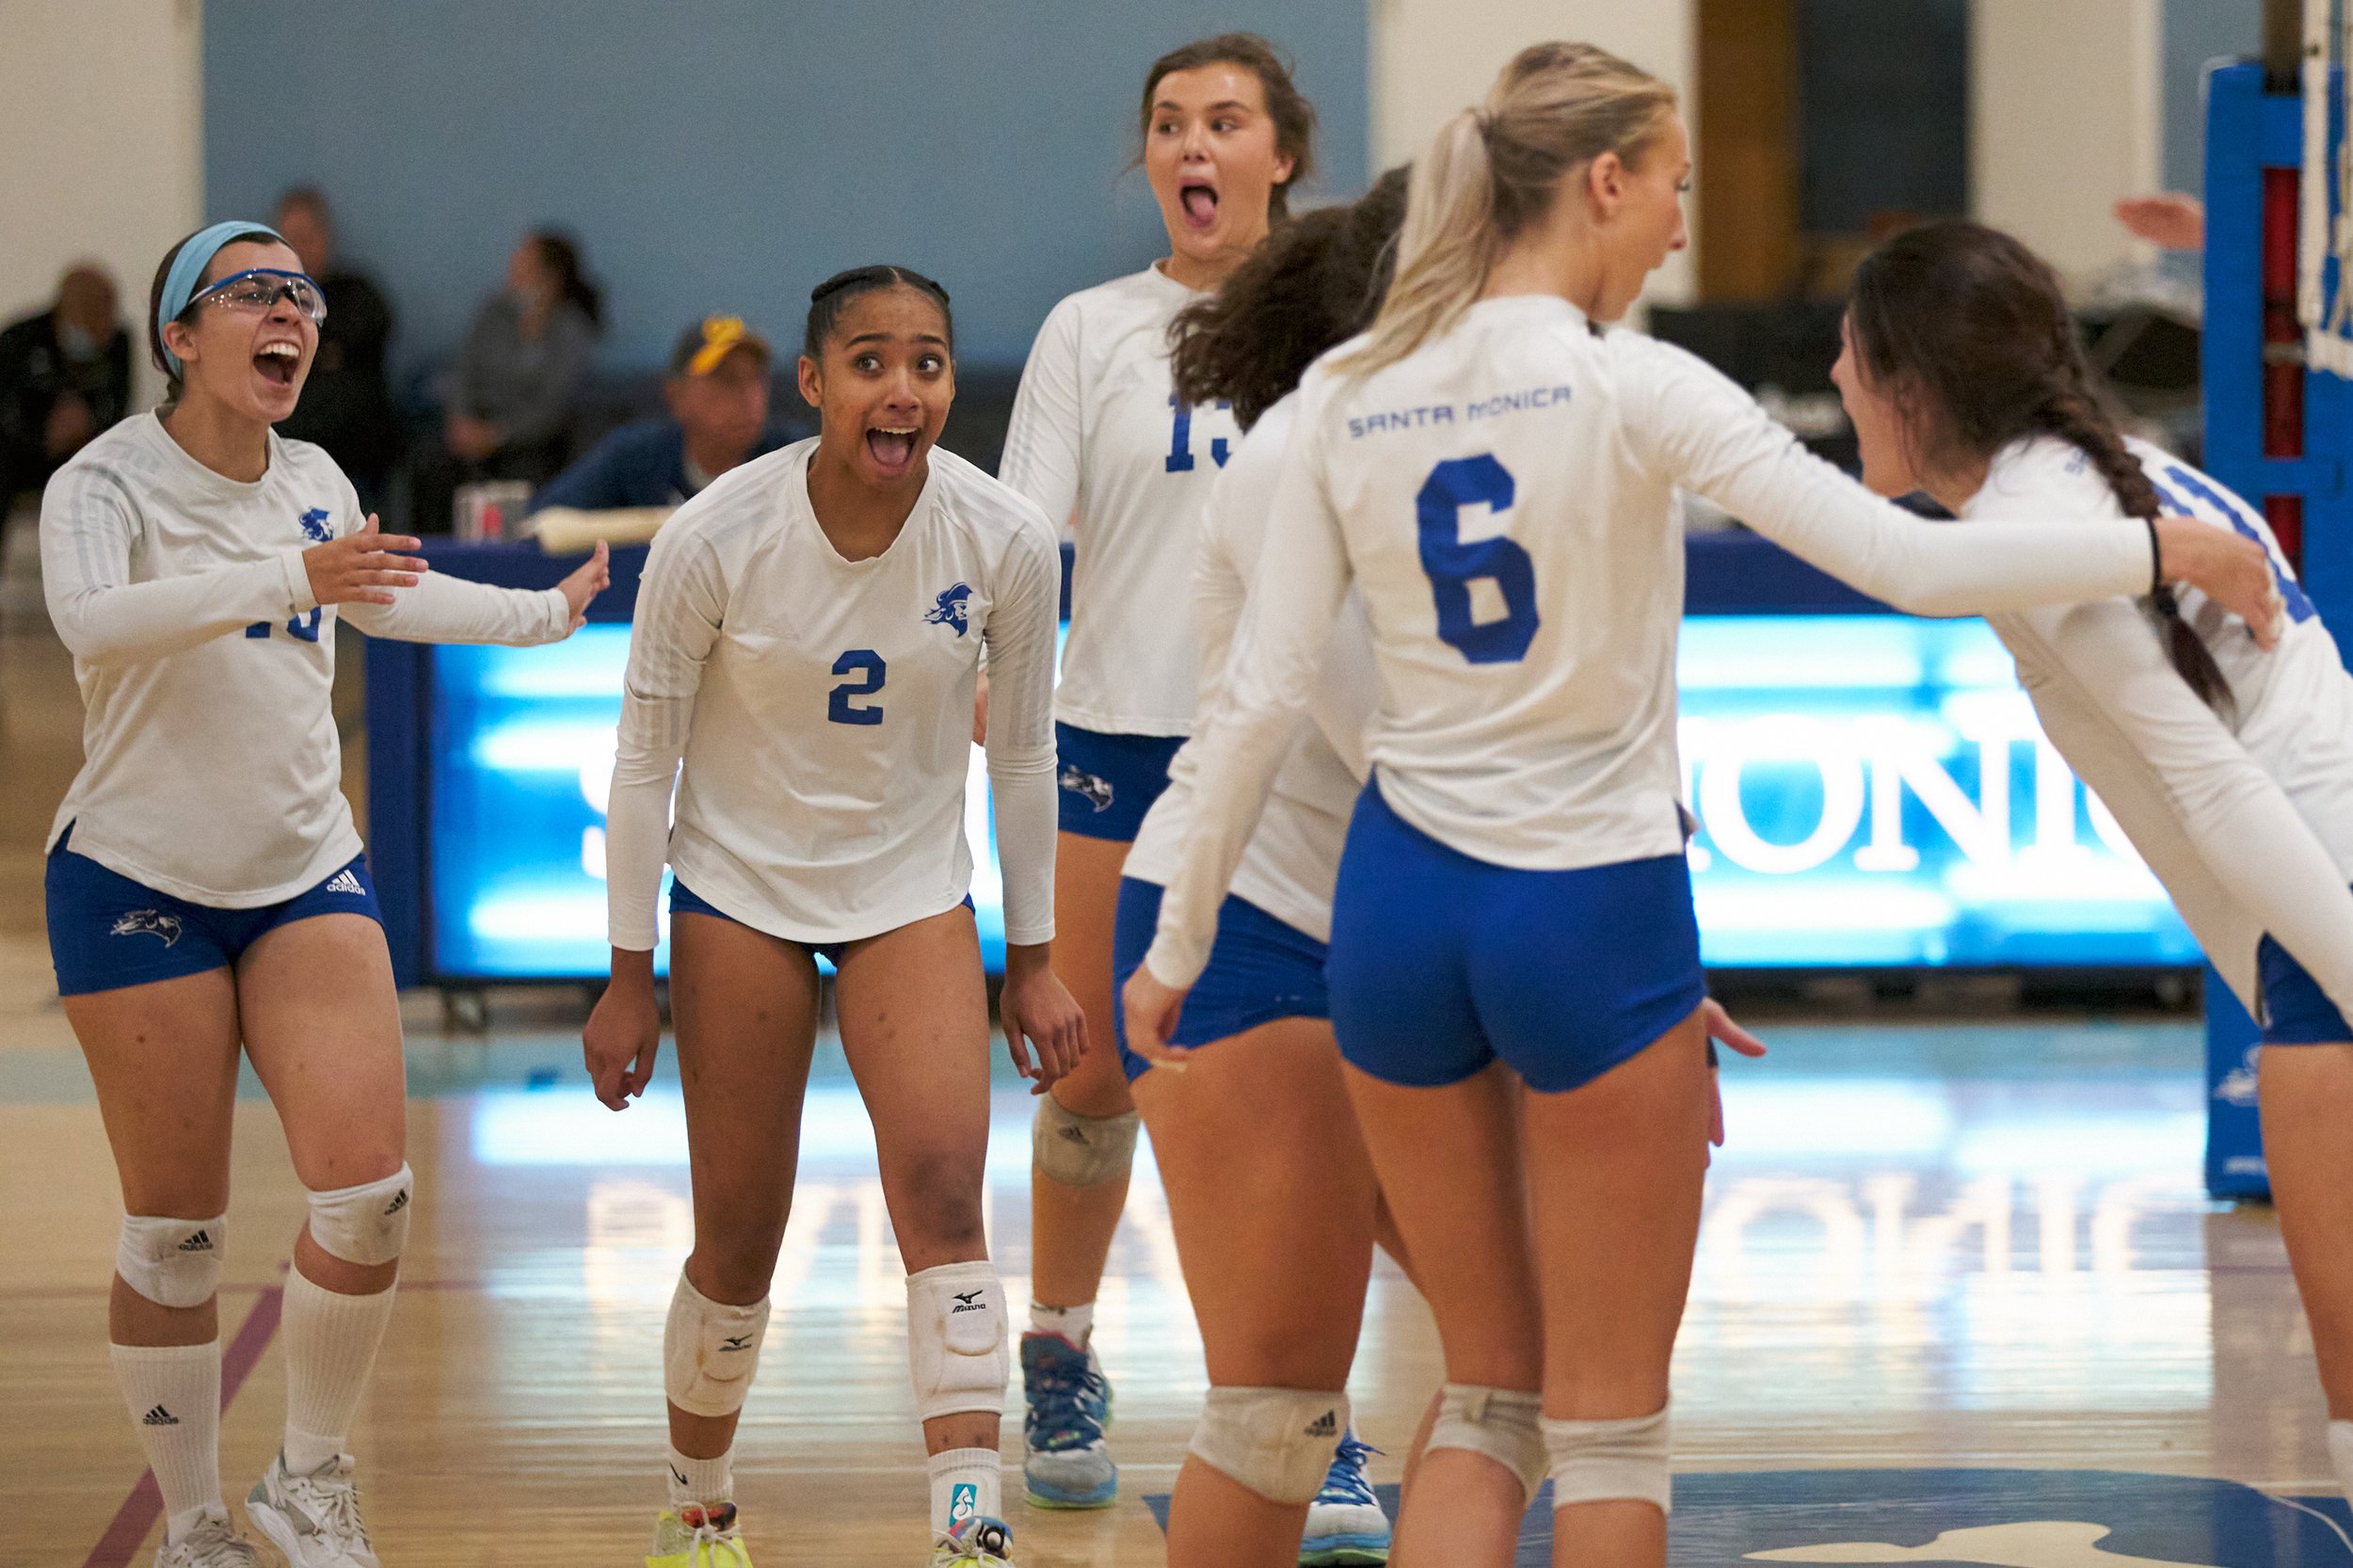  Santa Monica College Corsairs' Rachel Lallemand, Amaya Bernardo, Mackenzie Wolff, Sophia Lawrance, and Maiella Riva celebrate a point scored by Riva during the women's volleyball match against the Glendale Community College Vaqueros on Wednesday, No